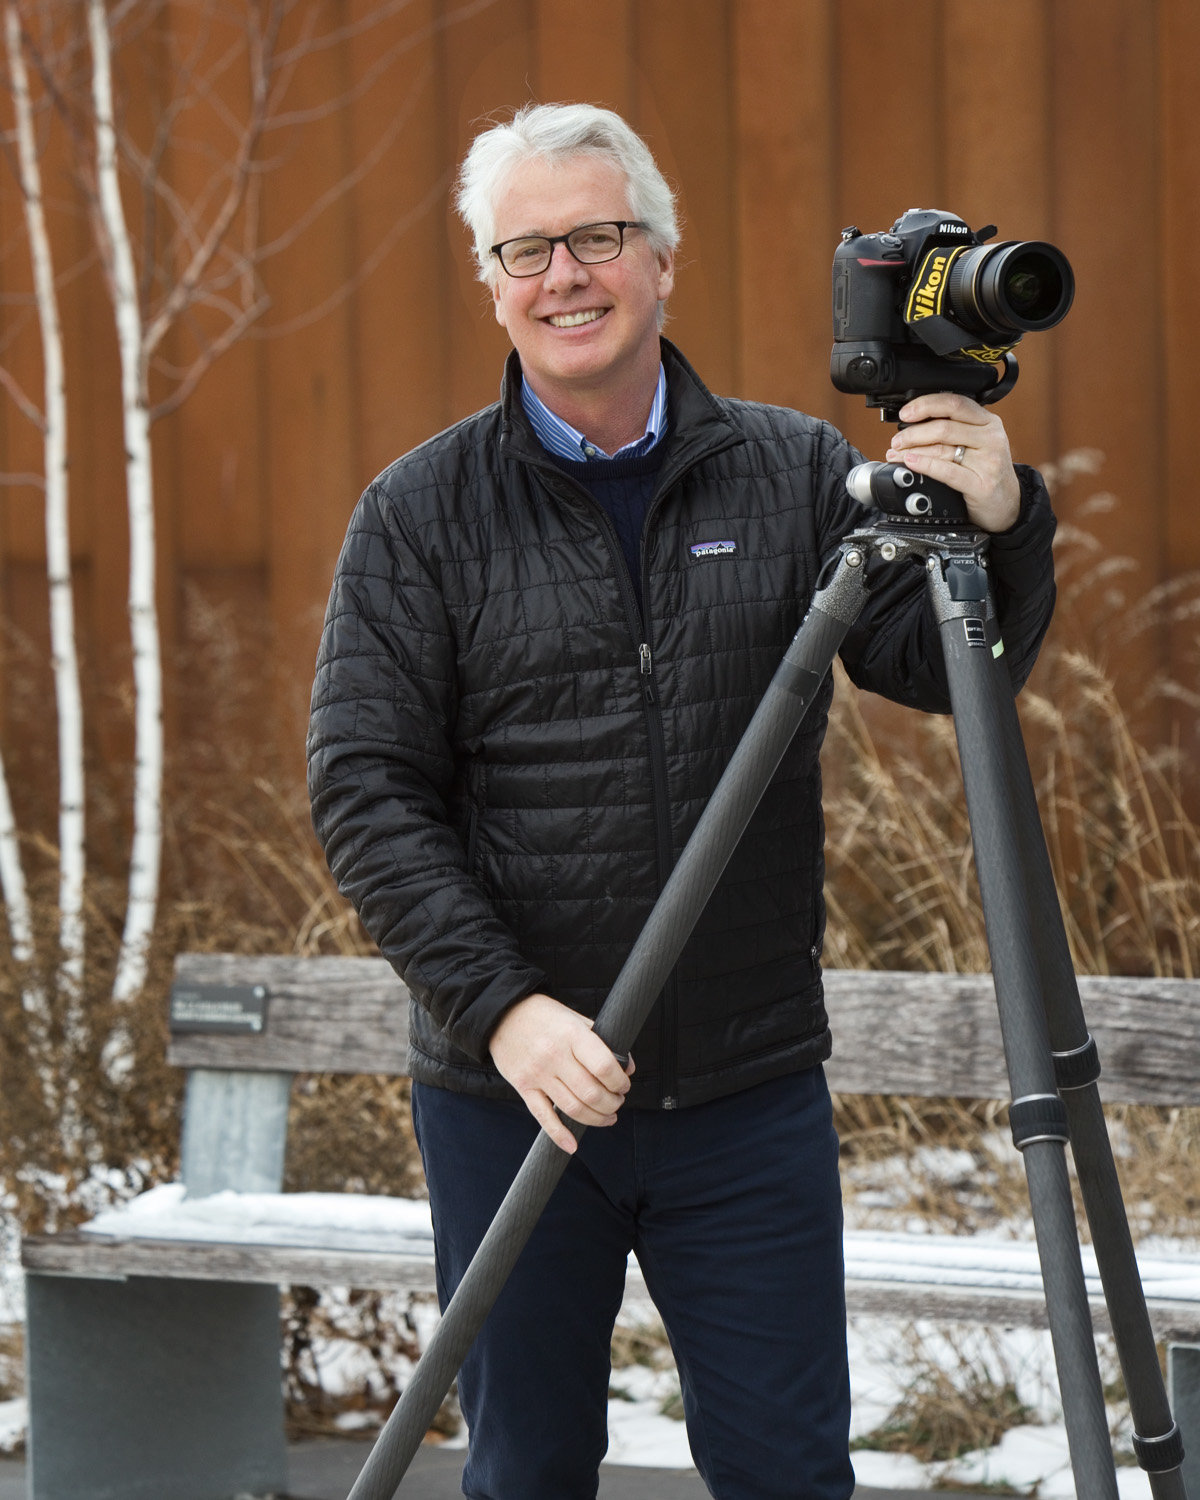 Astrophotographer Mike Shaw uses a sturdy tripod for his night photography, and a wide-angle lens to capture the full dome of sky overhead. (Photo by Margie O’Loughlin)